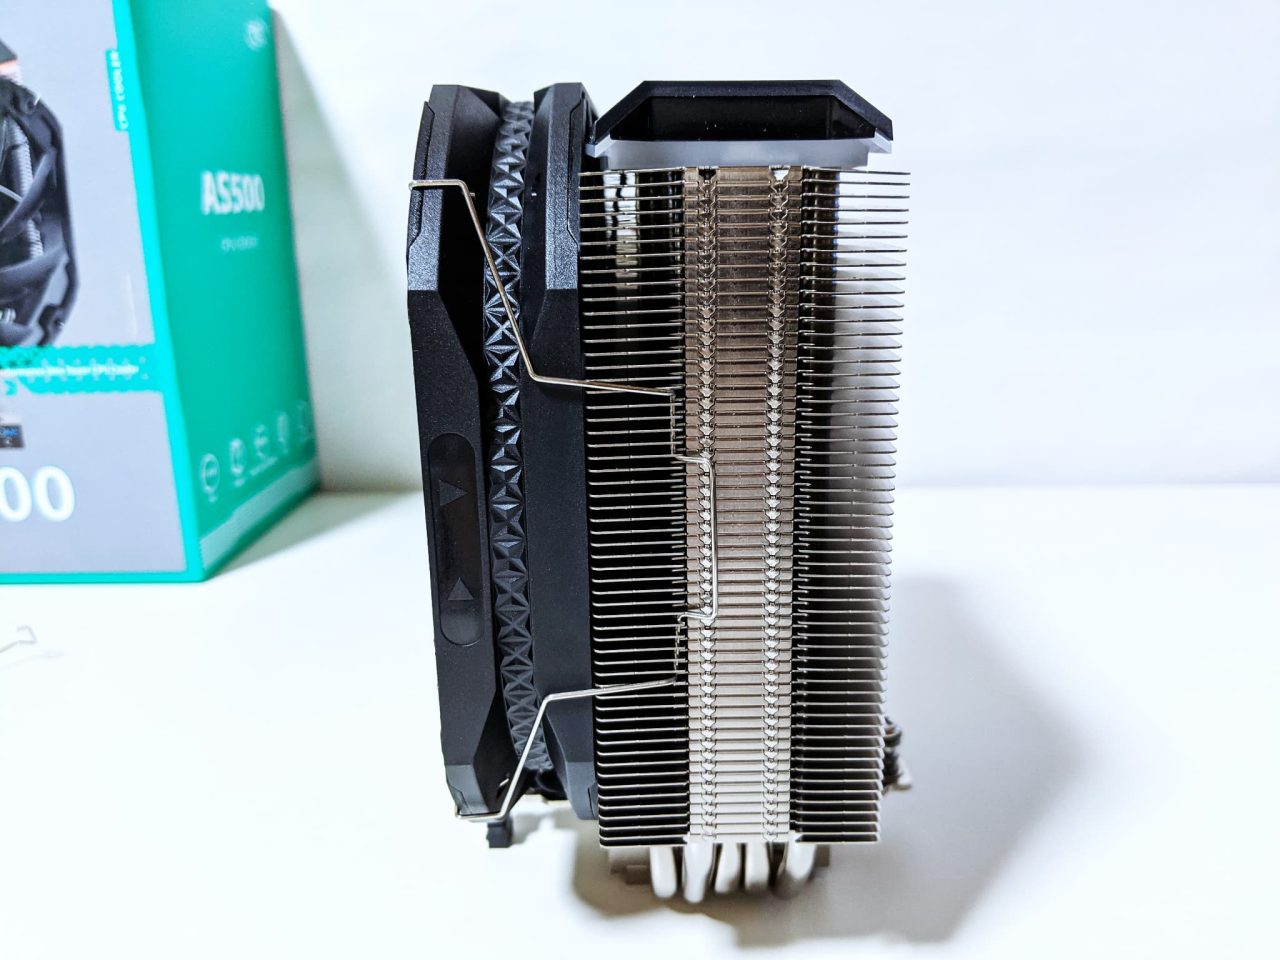 Deepcool-AS500-Review04